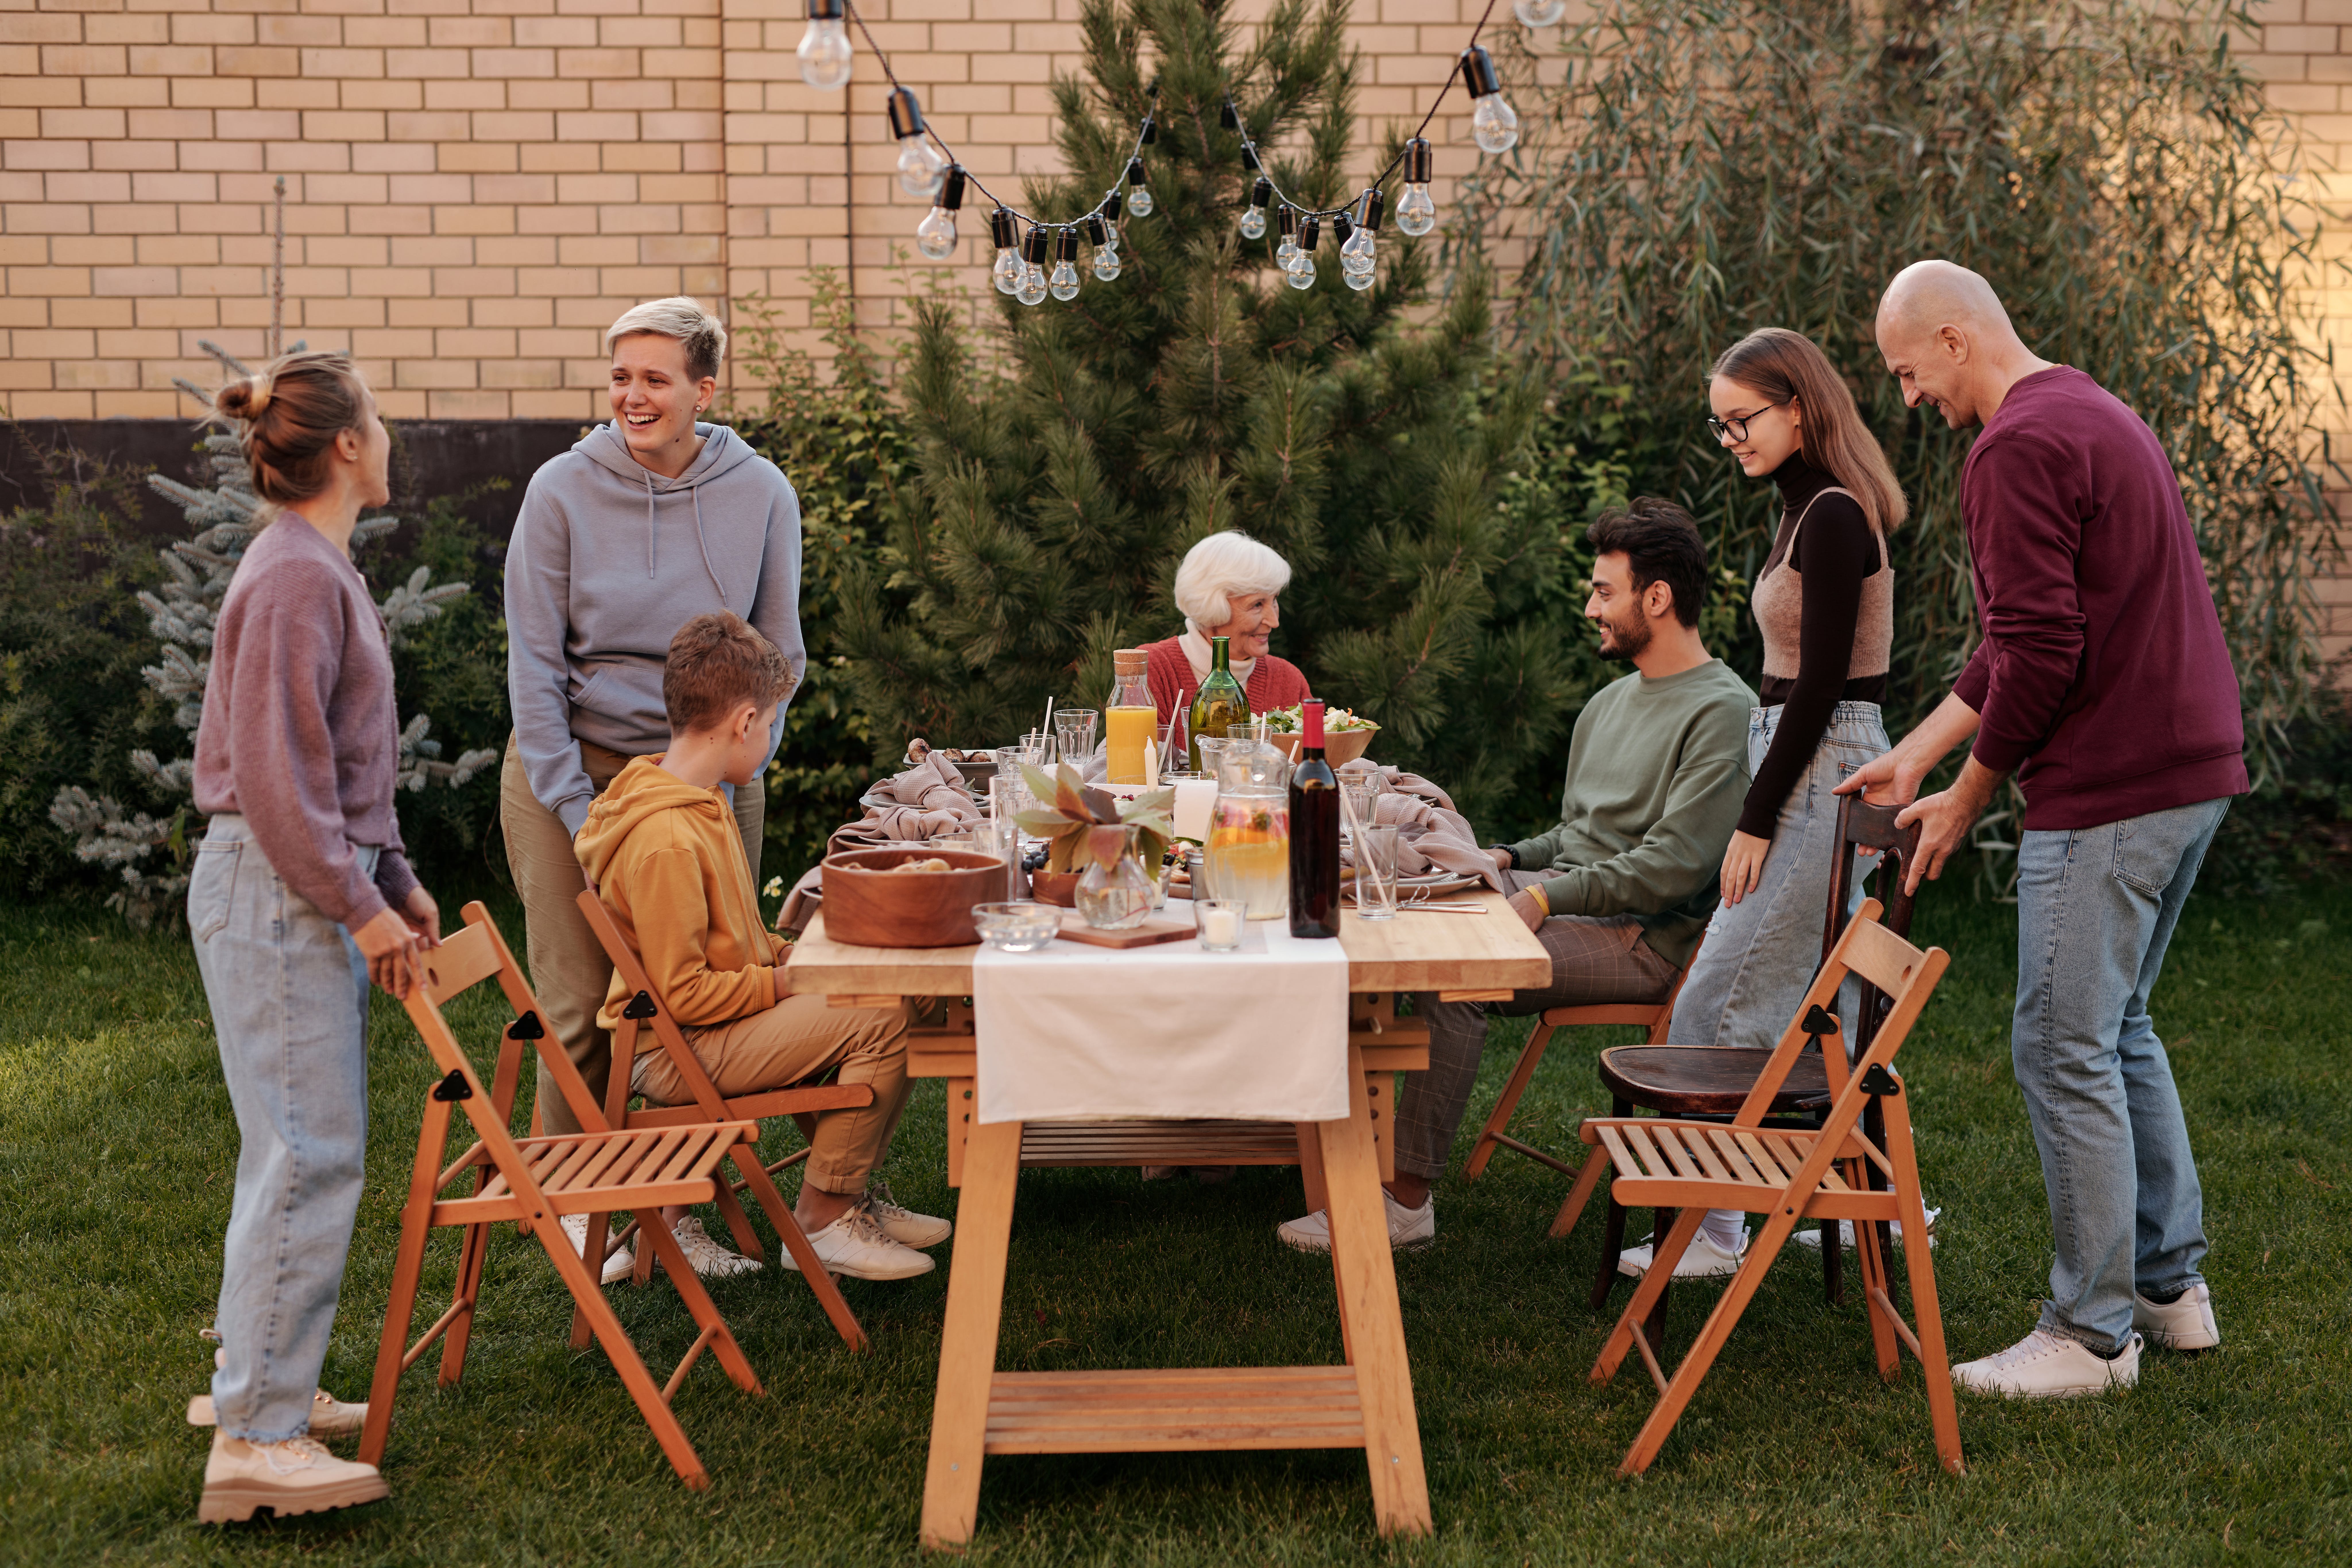 A family get-together | Source: Pexels